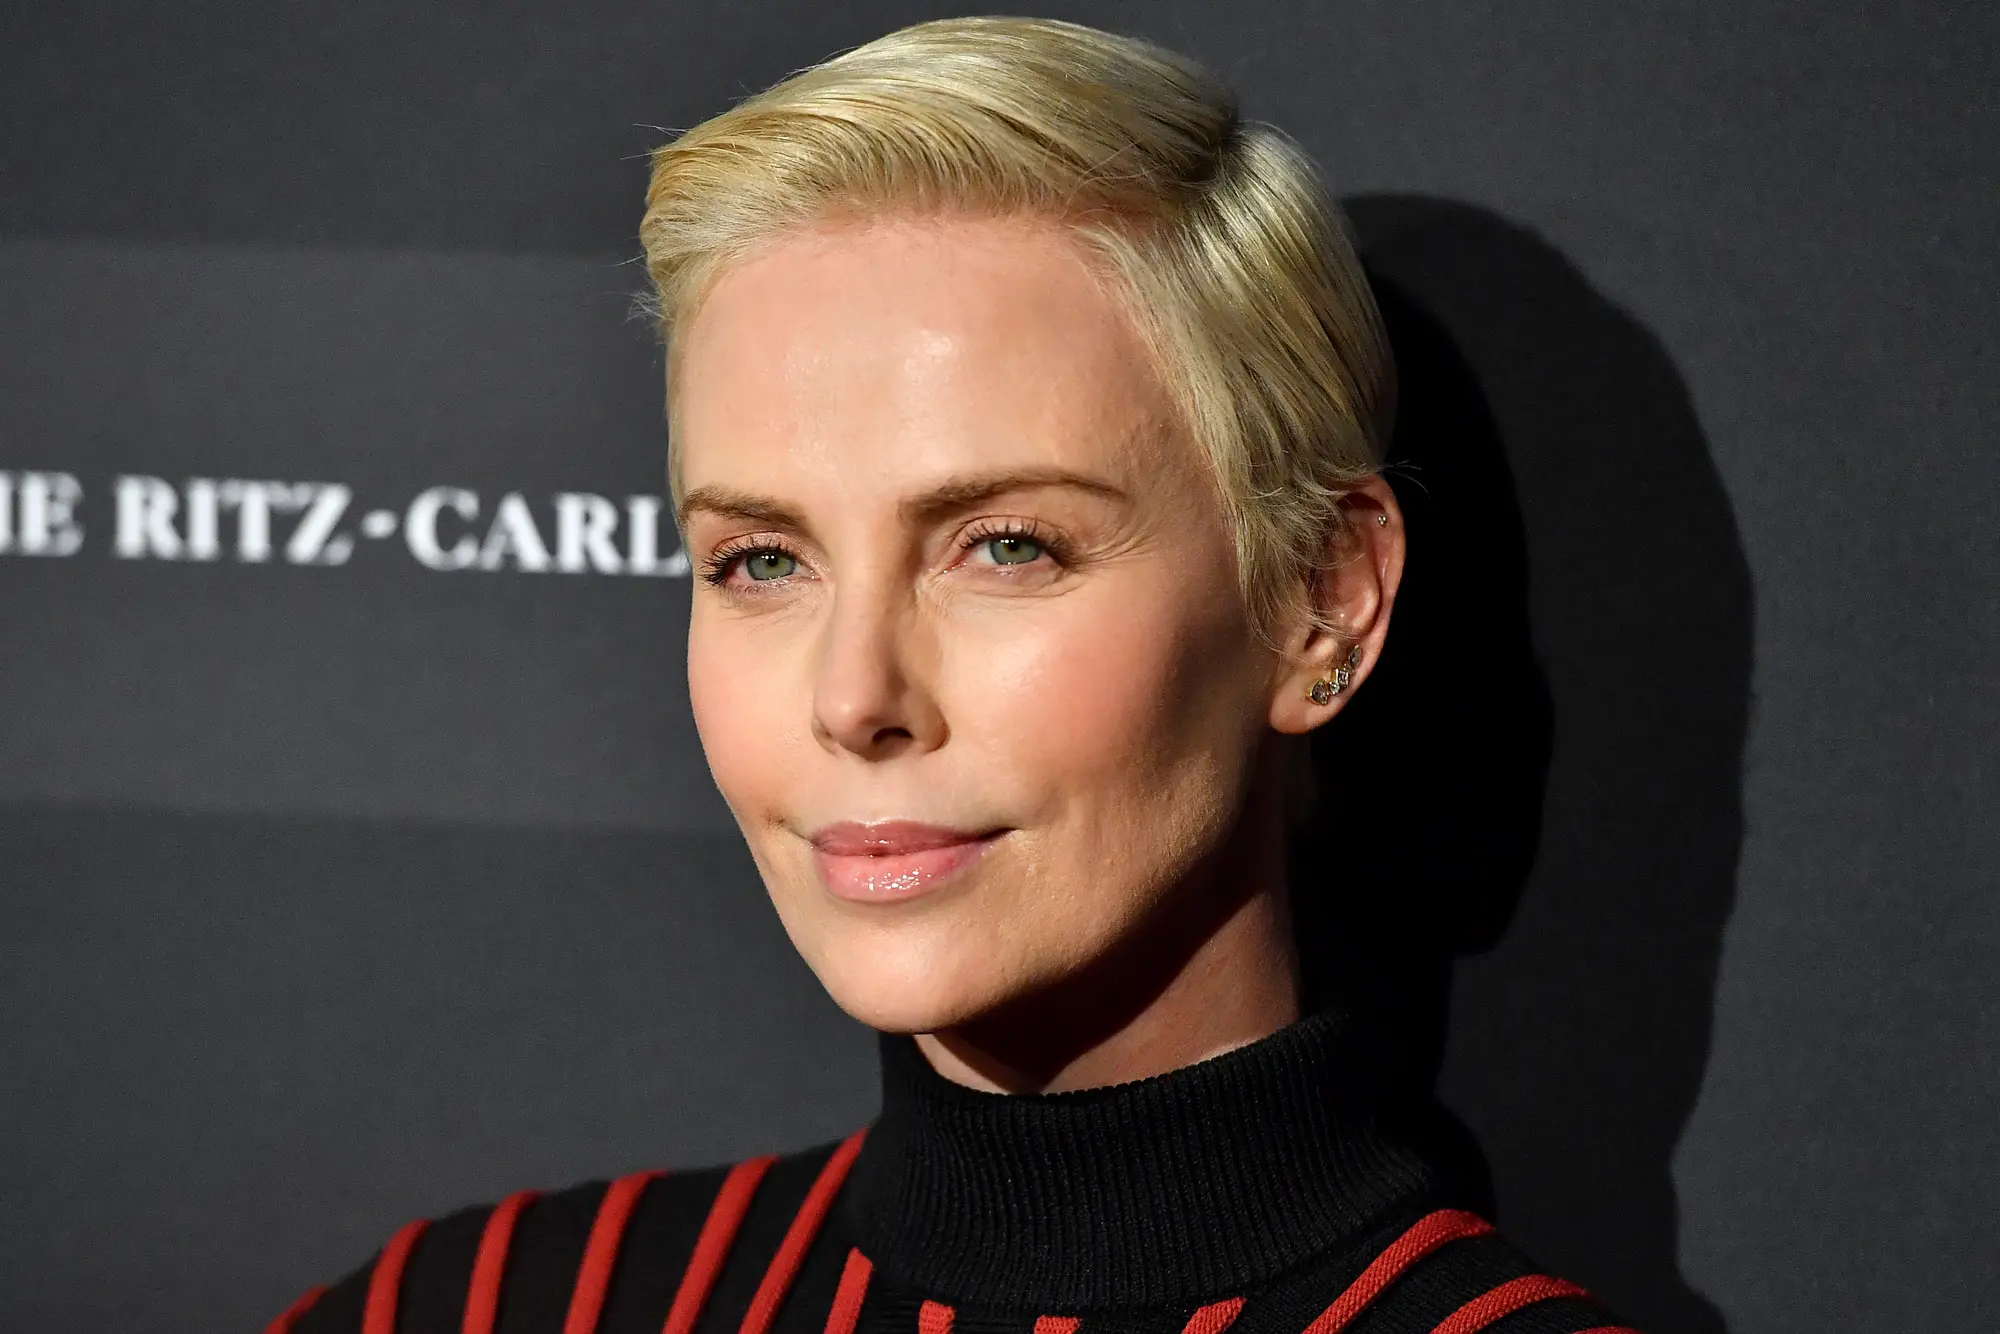 Charlize Theron: Biography, Age, Height, Figure, Net Worth